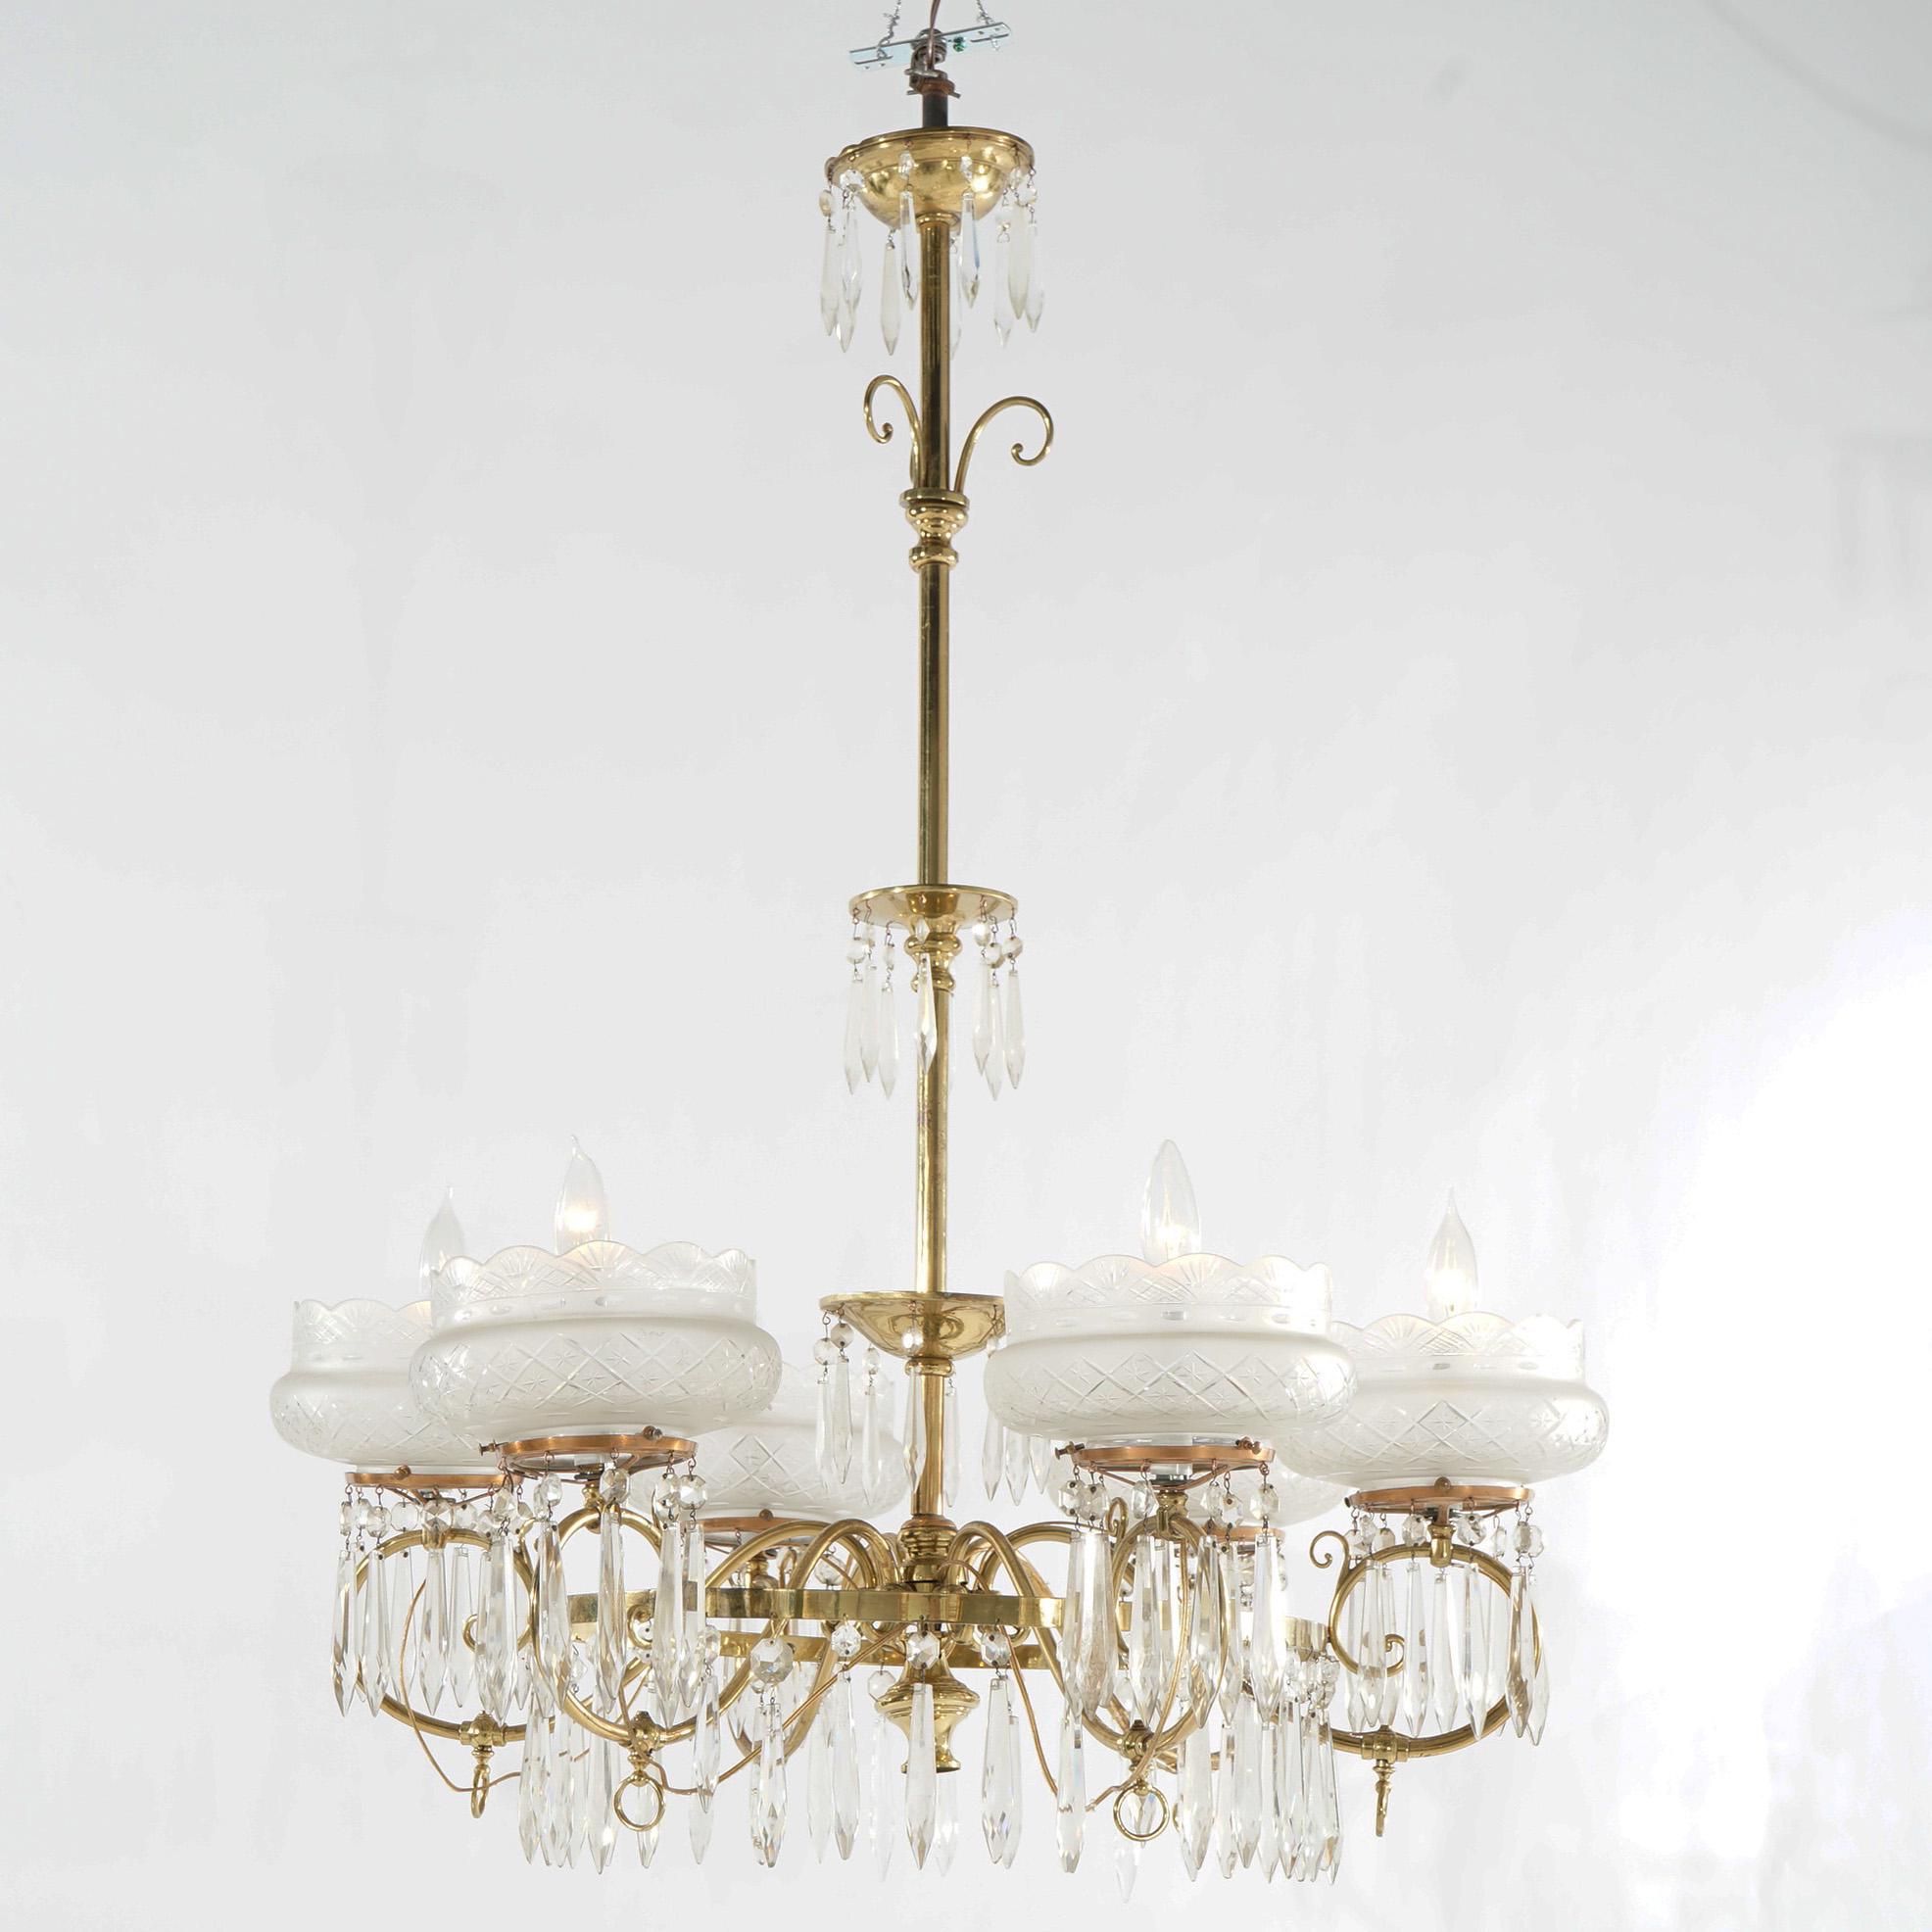 American Large Antique Aesthetic Brass Gas Chandelier With Cut Glass Shades & Crystals